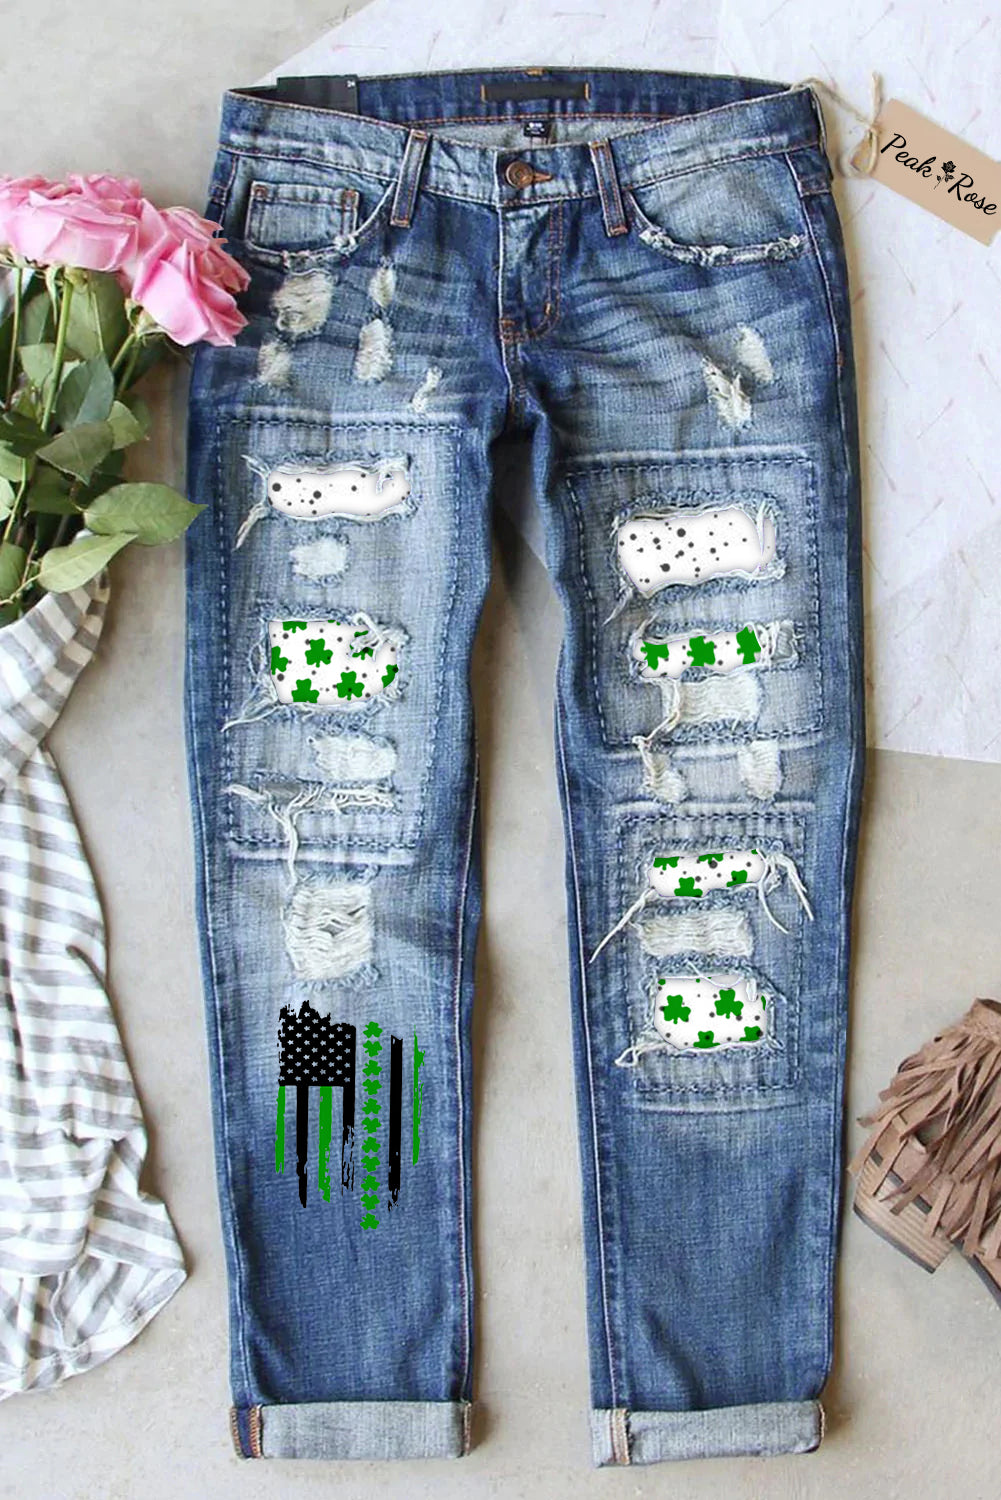 Textured Spotted Lucky Clover Striped Flag Denim Jeans